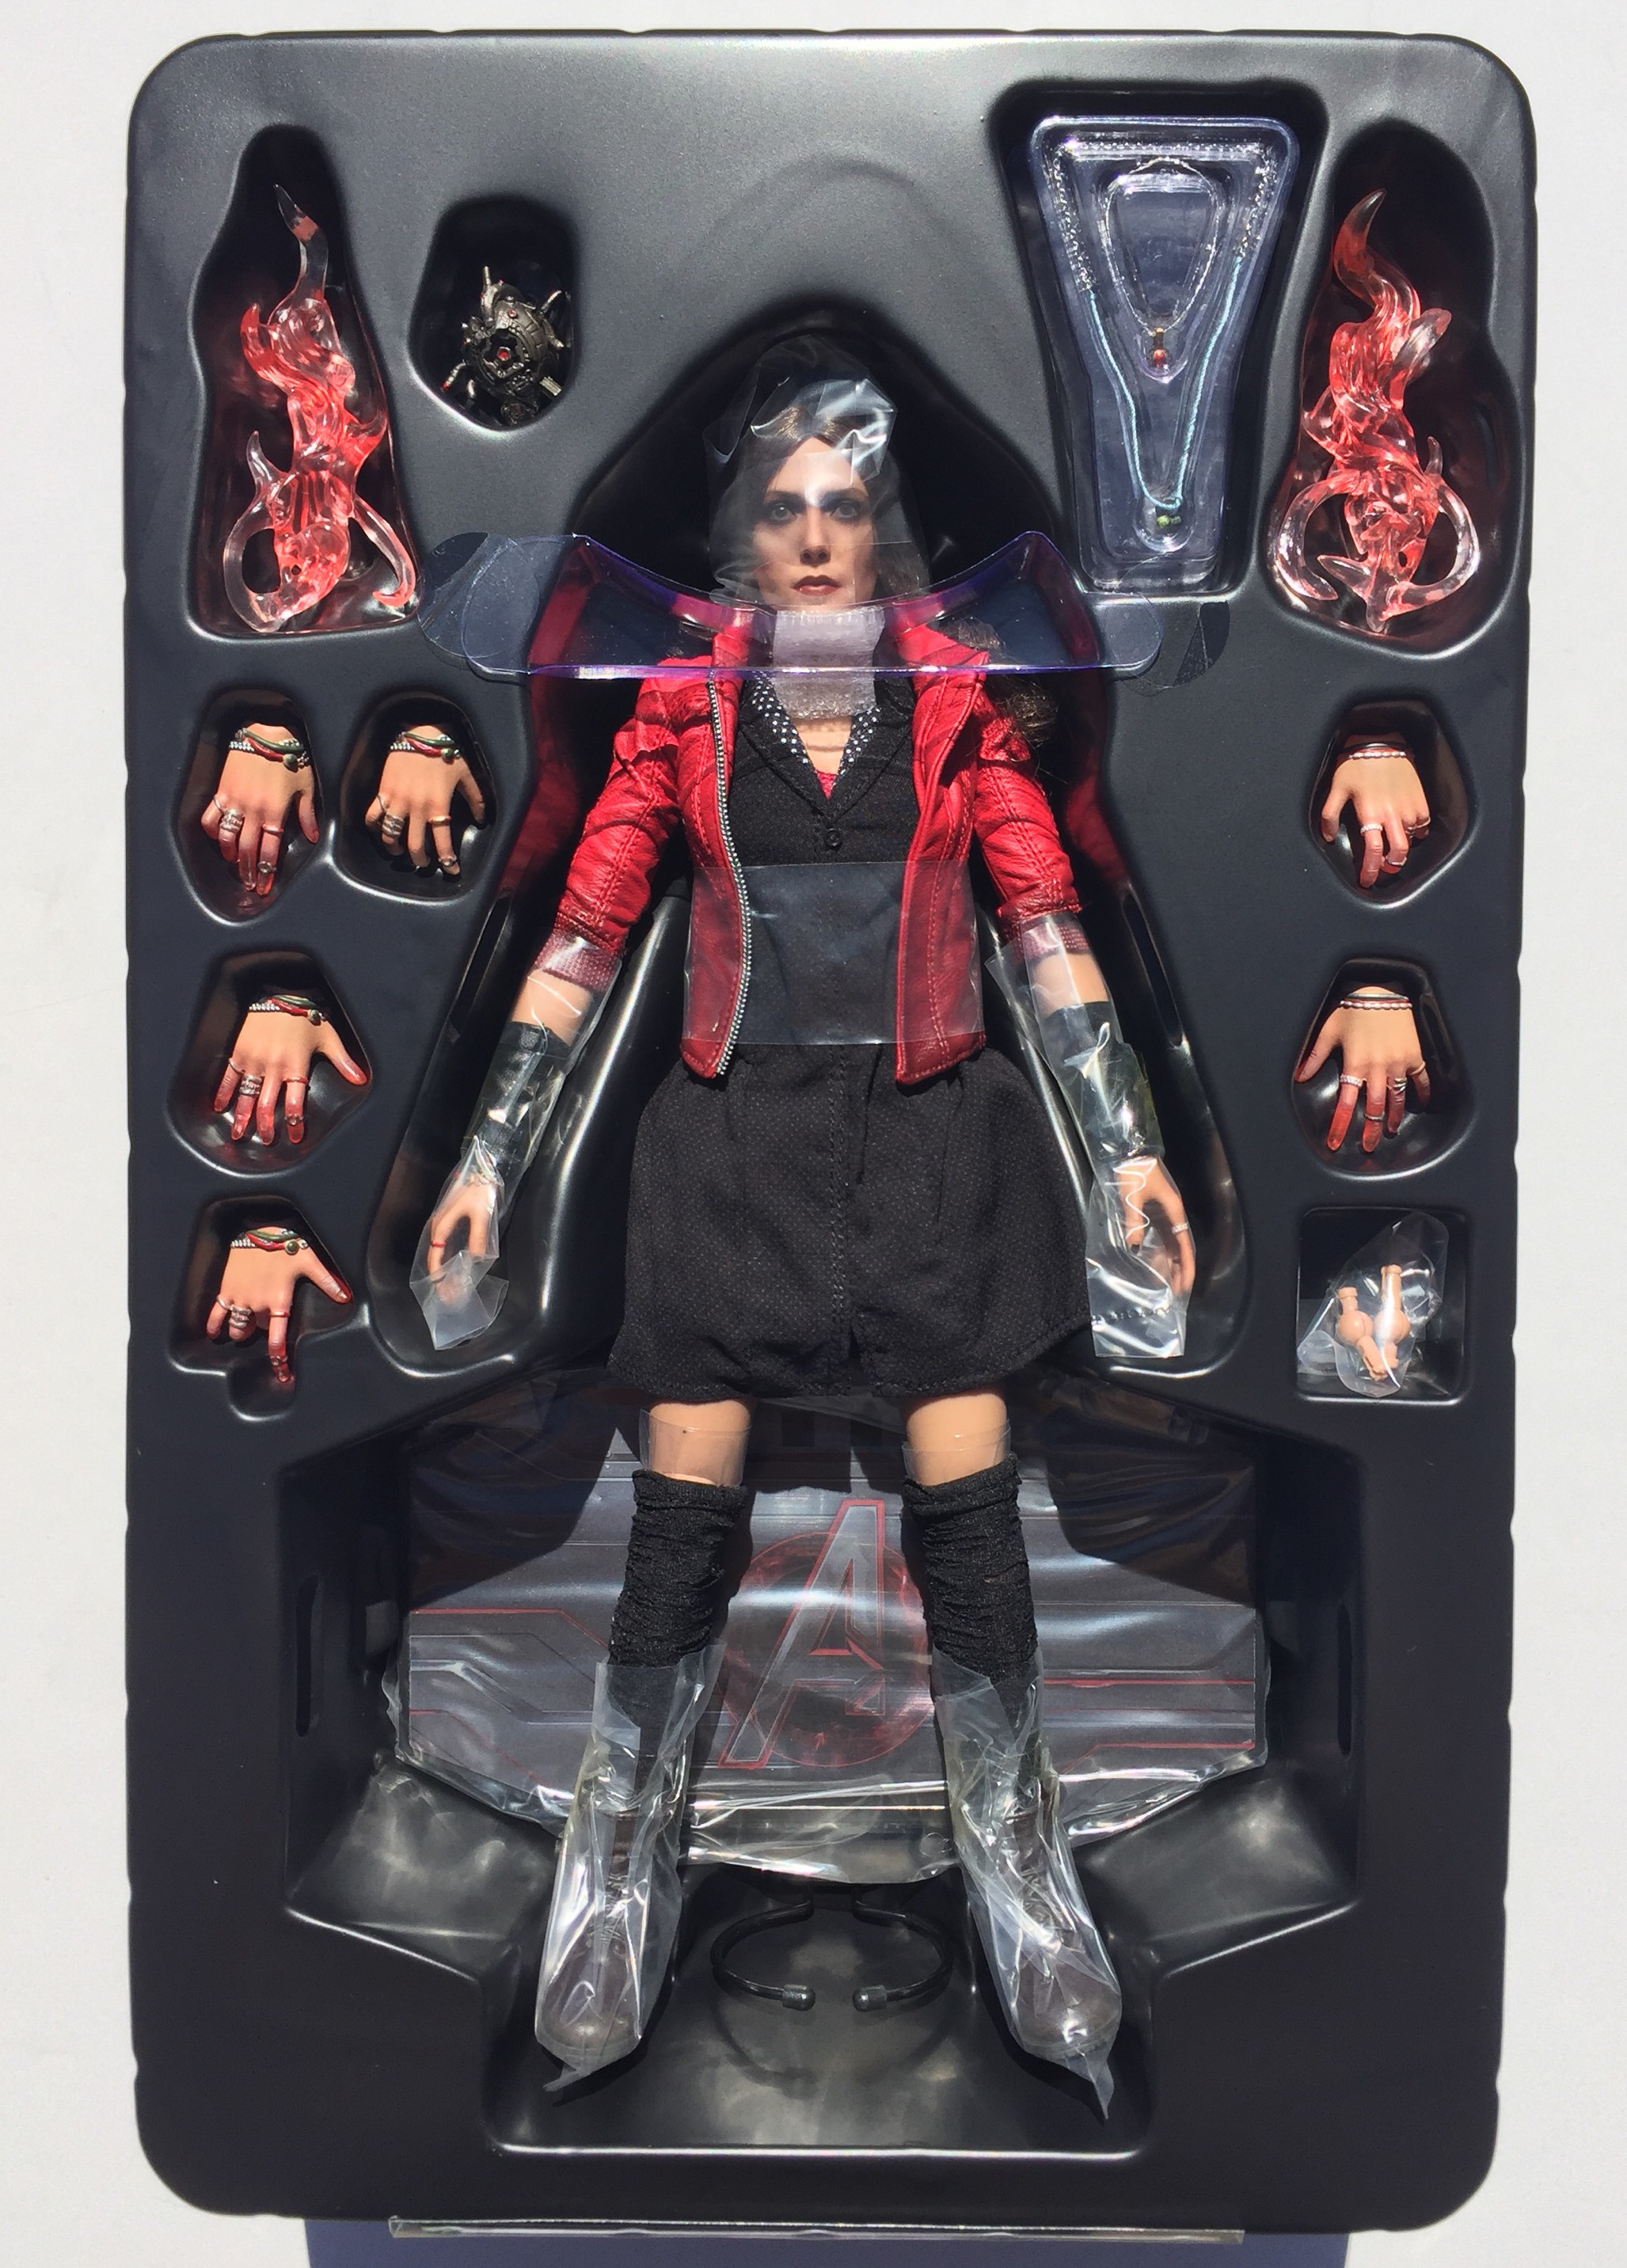 Scarlet Witch Sixth Scale Figure by Hot Toys